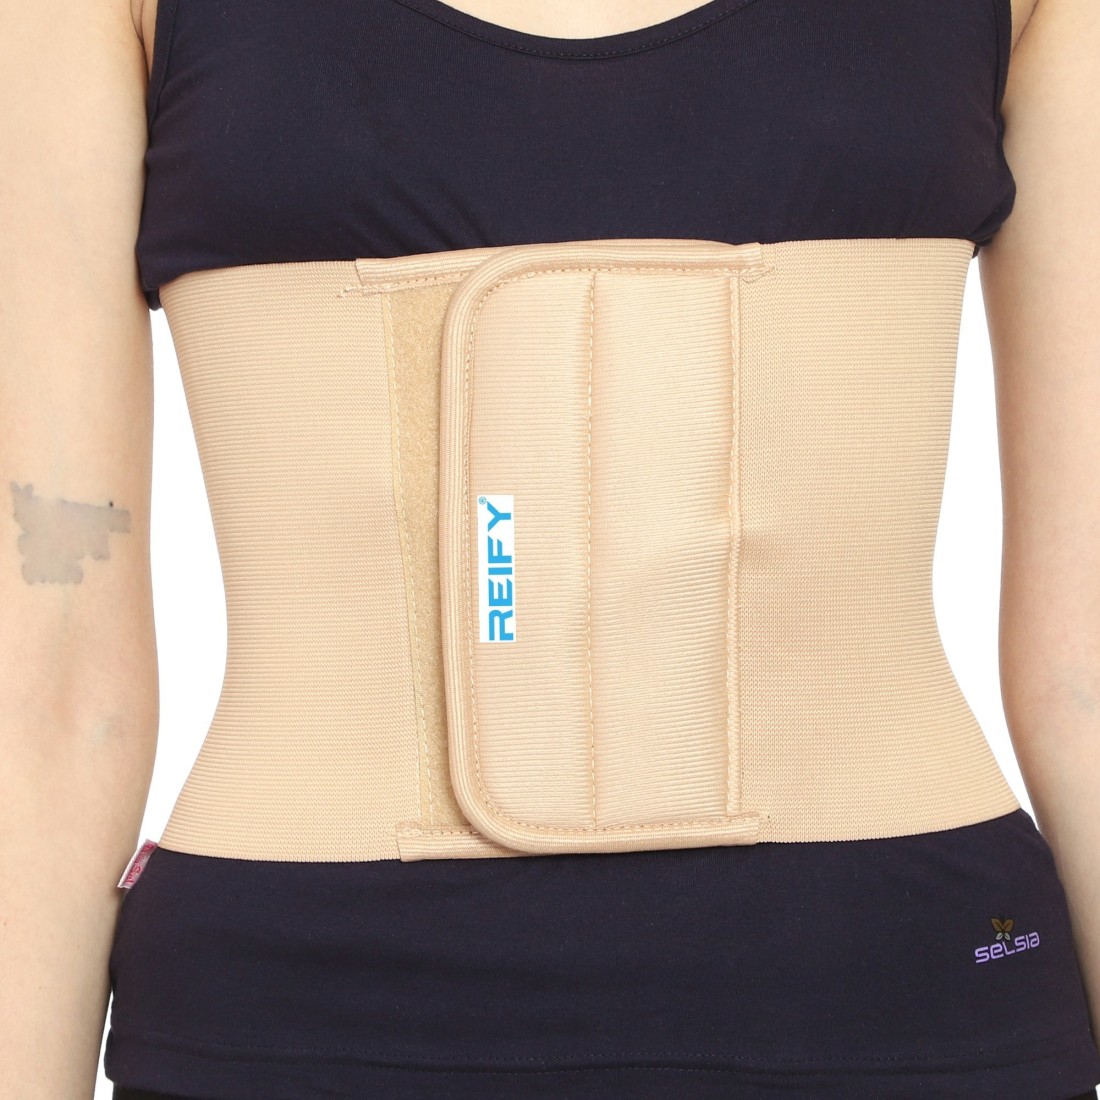 RCSP abdominal belt for women after delivery/surgery tummy reduction S  (24-30) Inch Abdominal Belt - Buy RCSP abdominal belt for women after  delivery/surgery tummy reduction S (24-30) Inch Abdominal Belt Online at